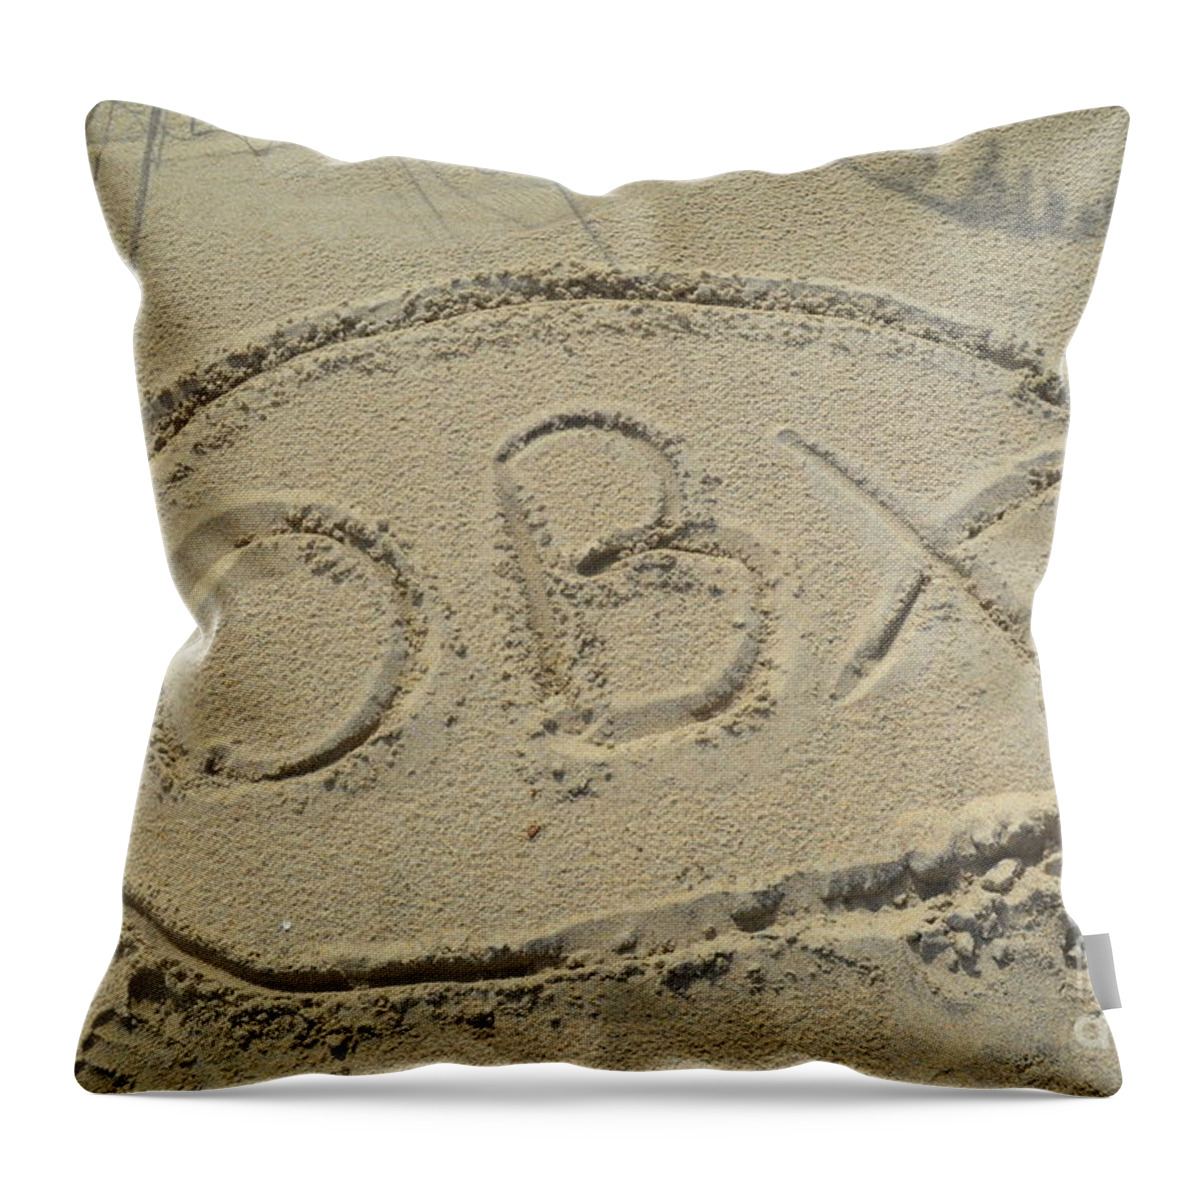 An Obx Outer Banks Sign Drew In The Sand At Cape Hatteras Beach. Obx Throw Pillow featuring the photograph OBX Sign in the Sand by Robert Loe